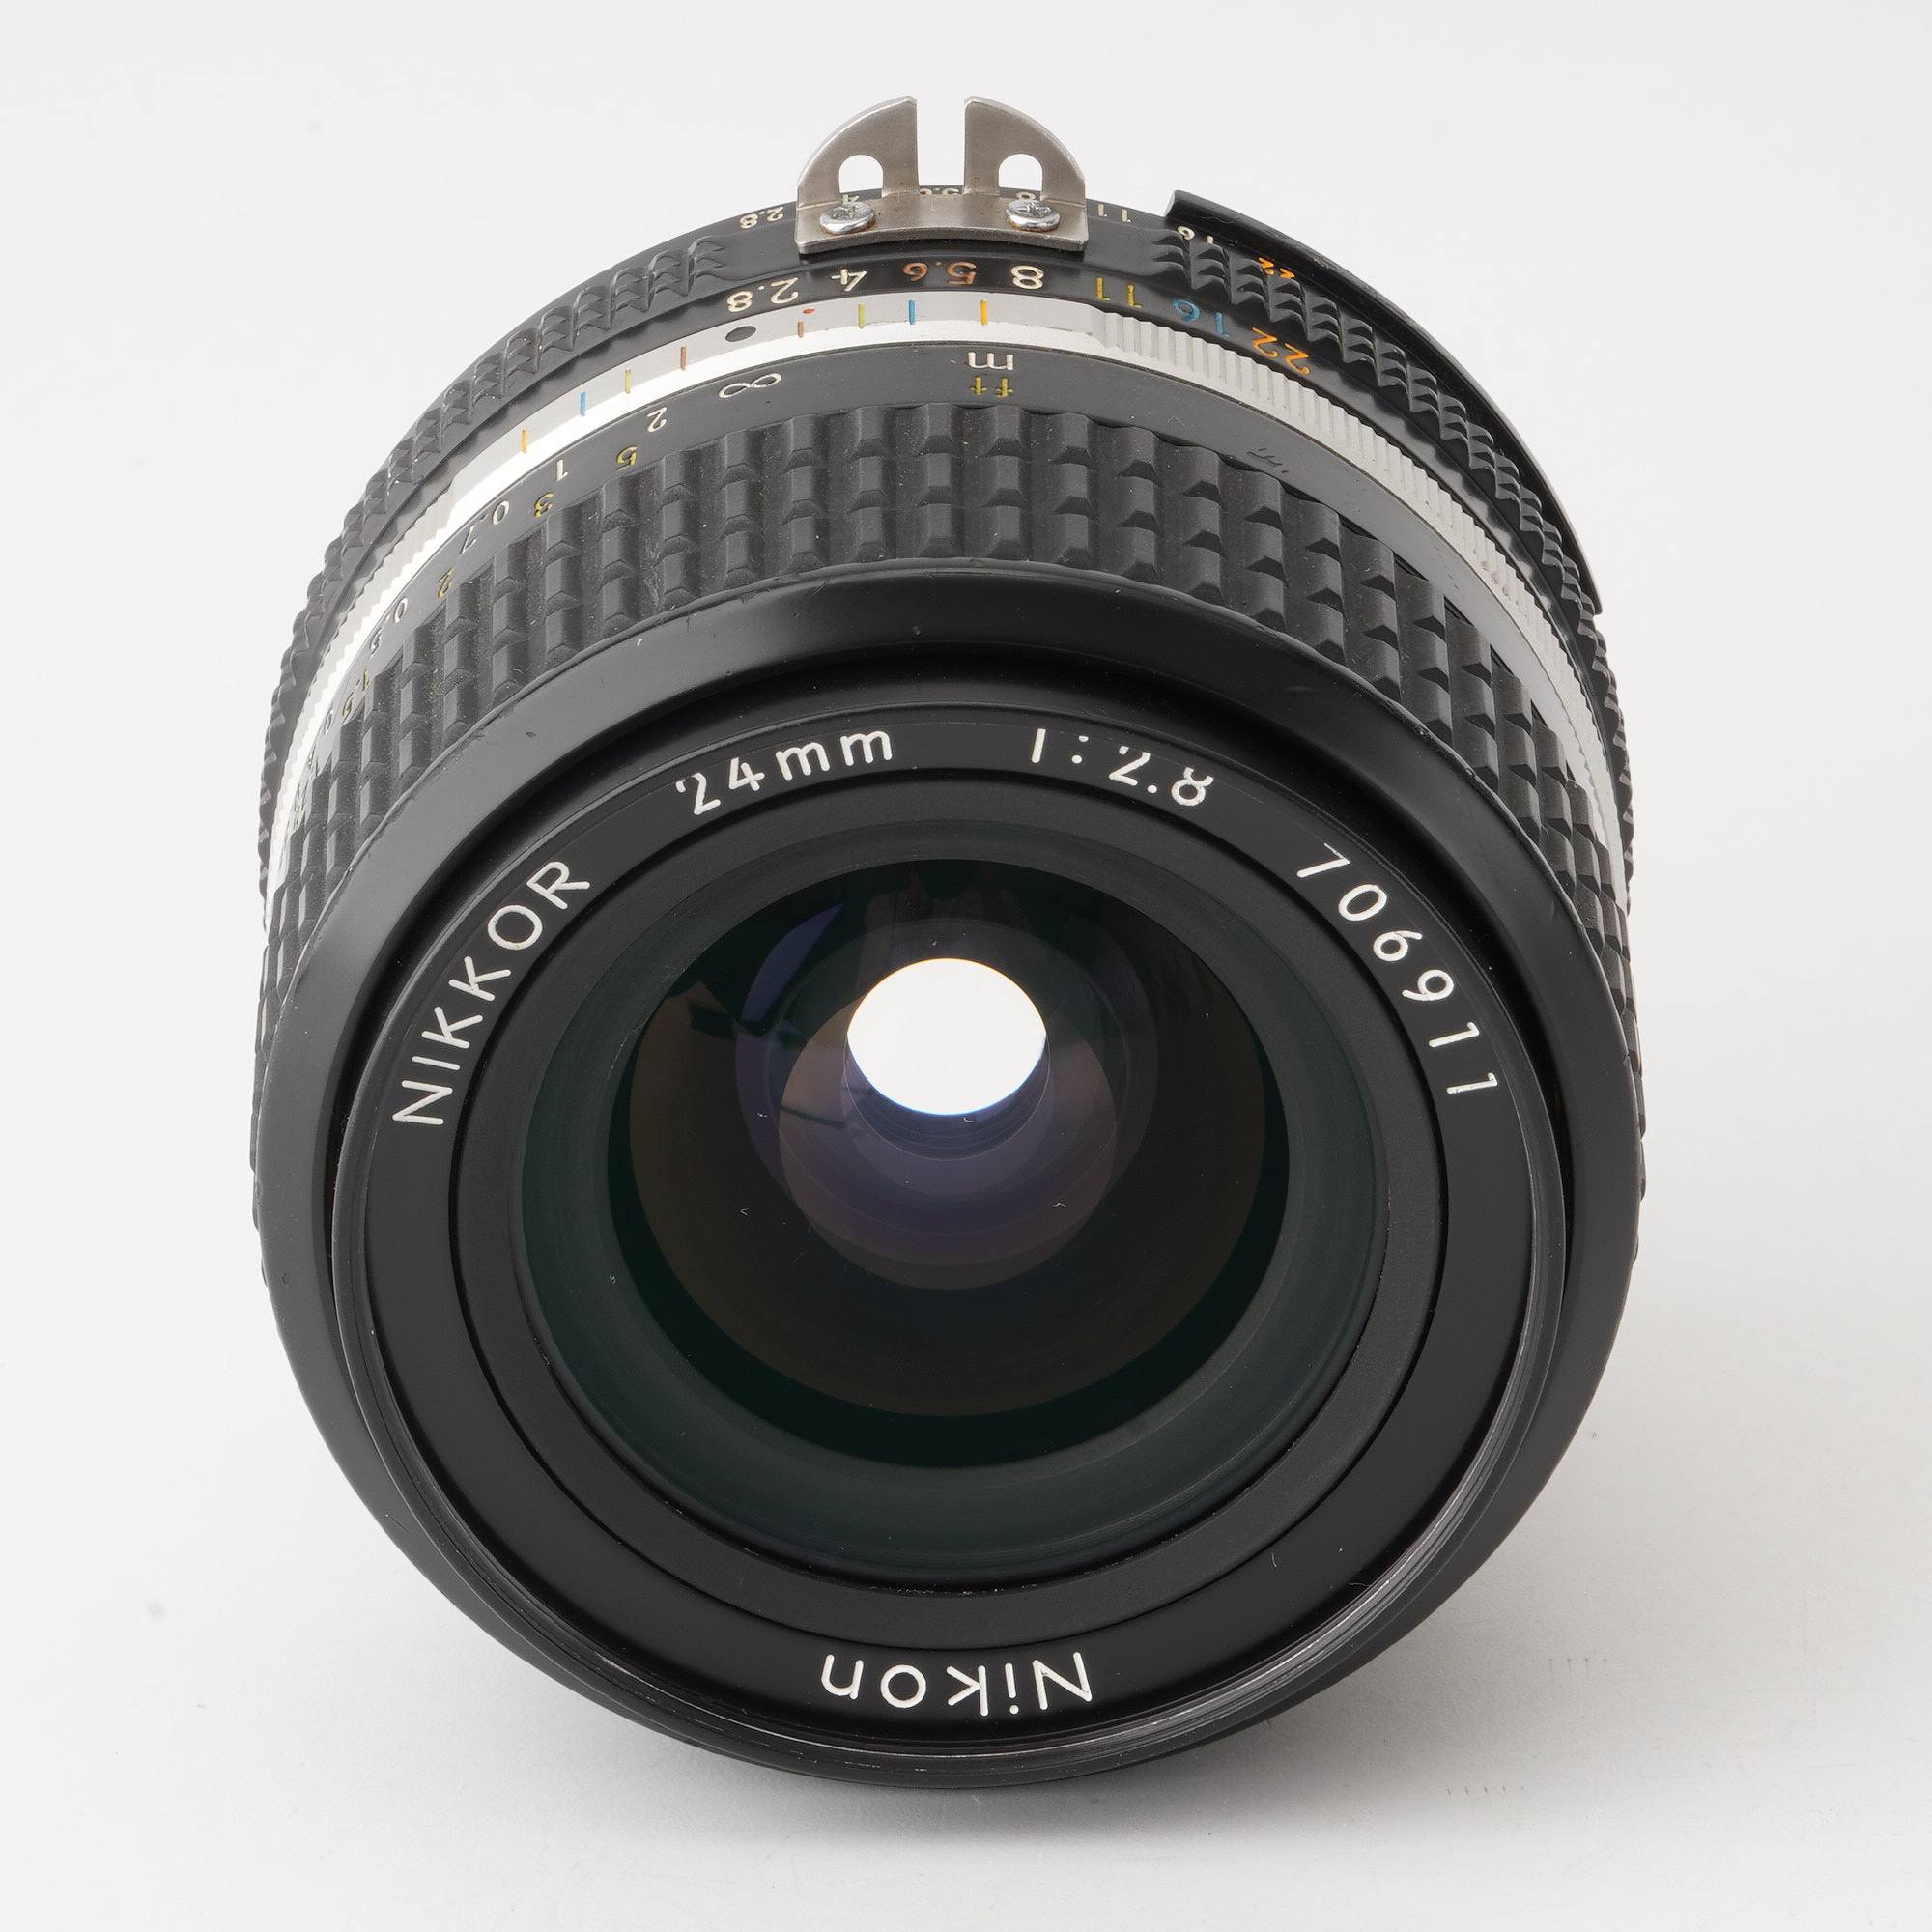 Nikon ニコン Ai-s NIKKOR 24mm f2.8